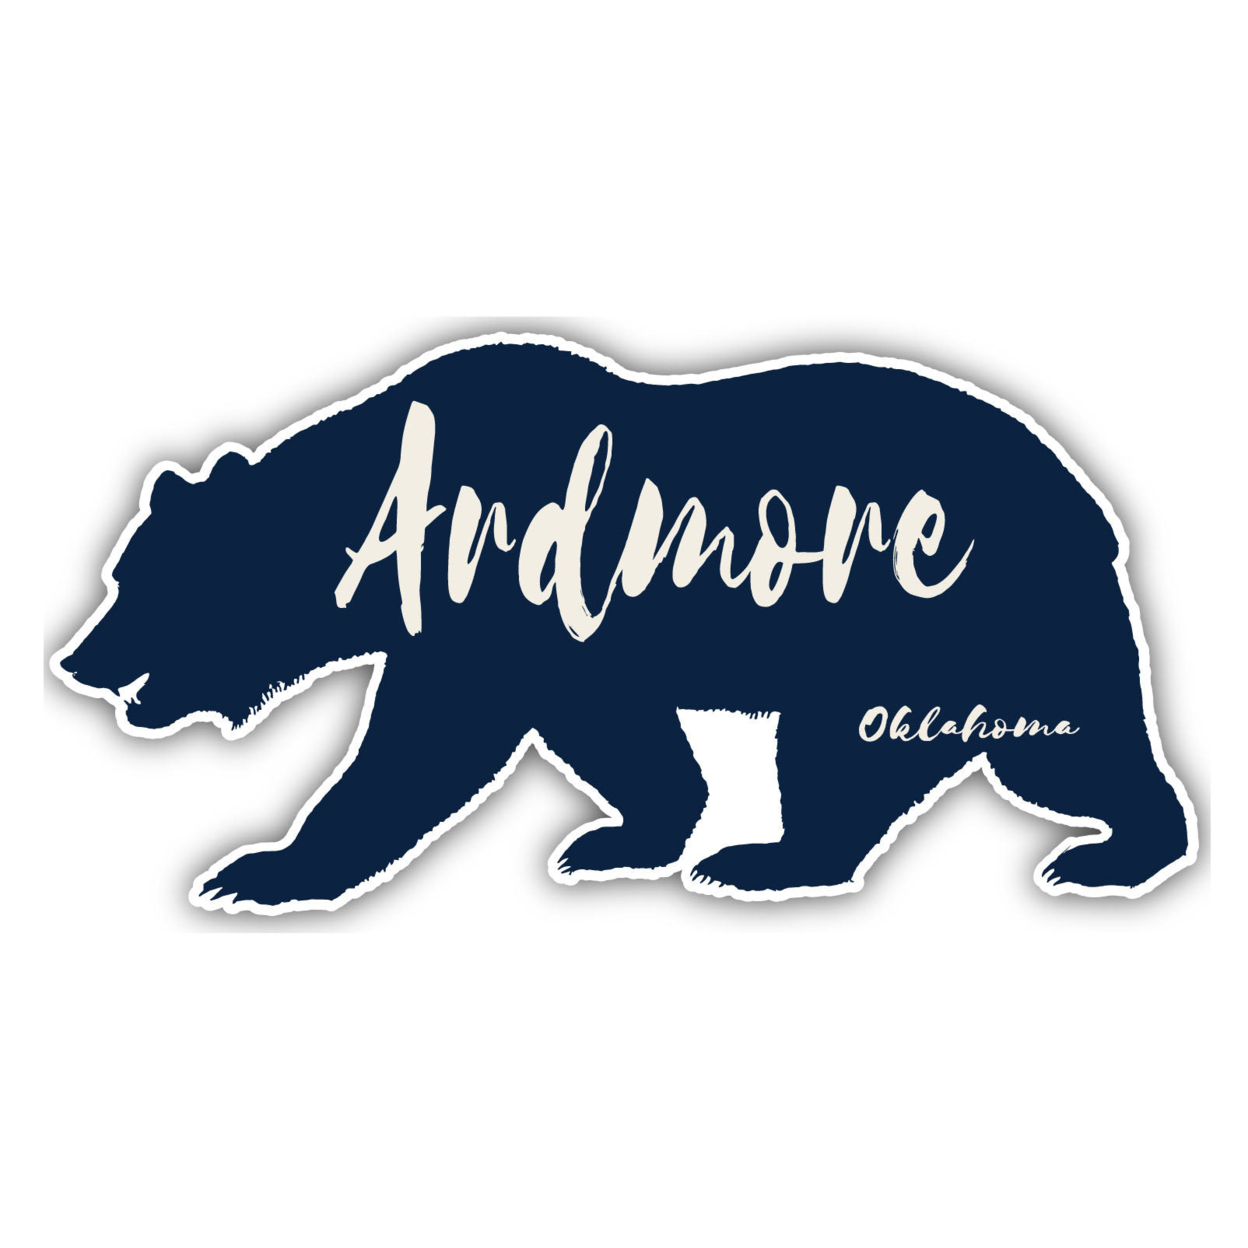 Ardmore Oklahoma Souvenir Decorative Stickers (Choose Theme And Size) - 4-Pack, 10-Inch, Adventures Awaits